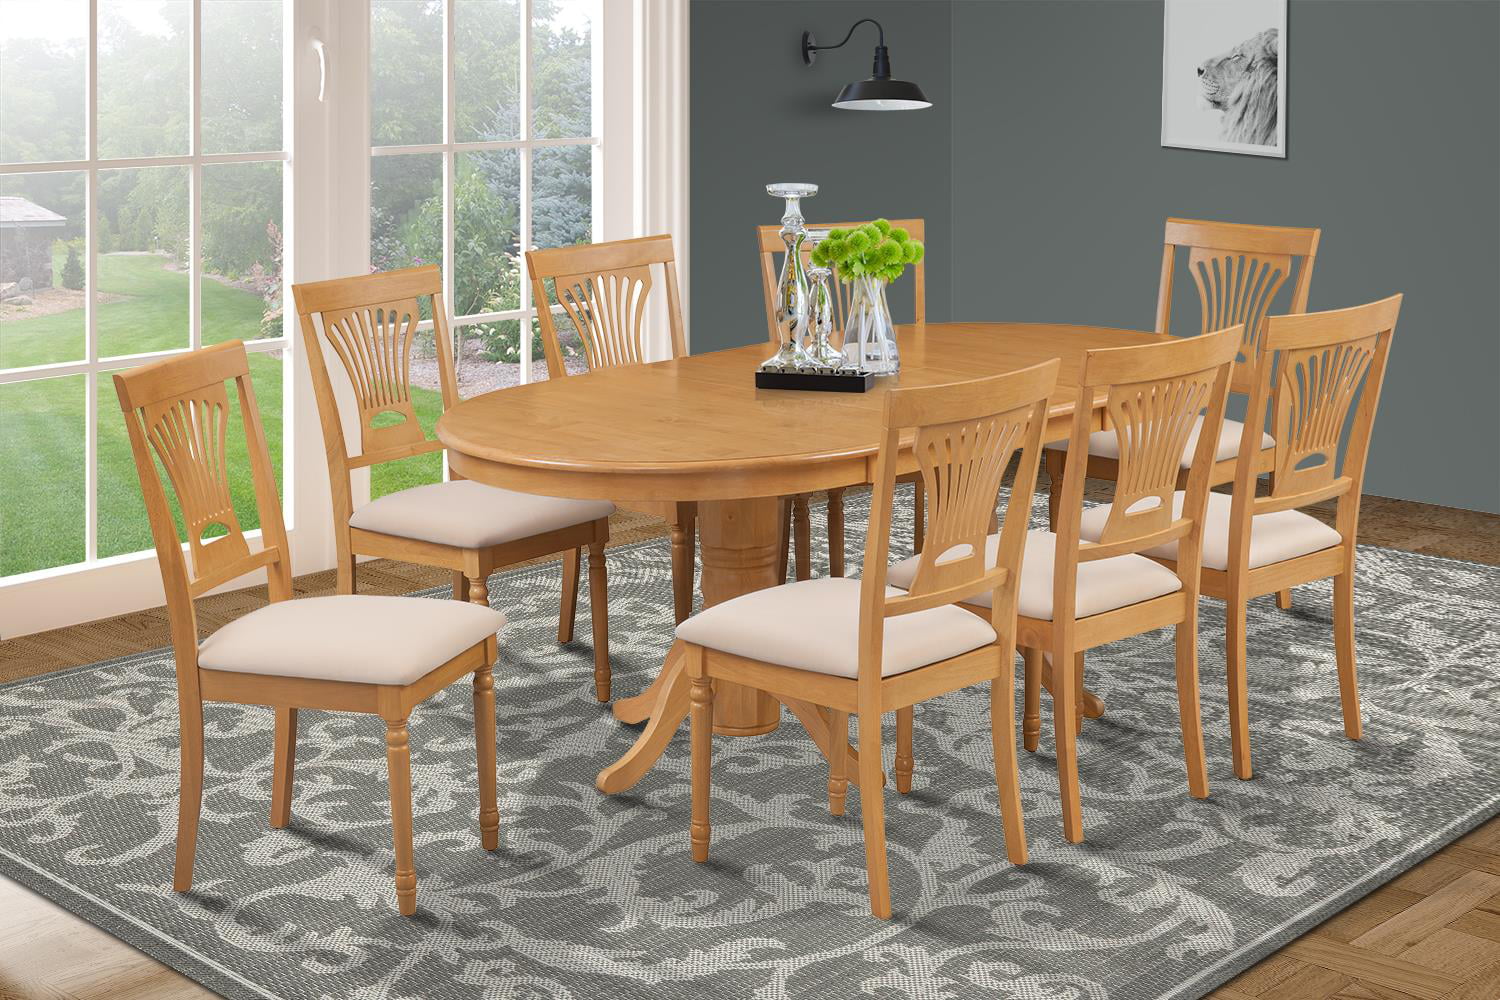 9 Piece Dining Room Set Table With A Butterfly Leaf And 8 Dining Chairs